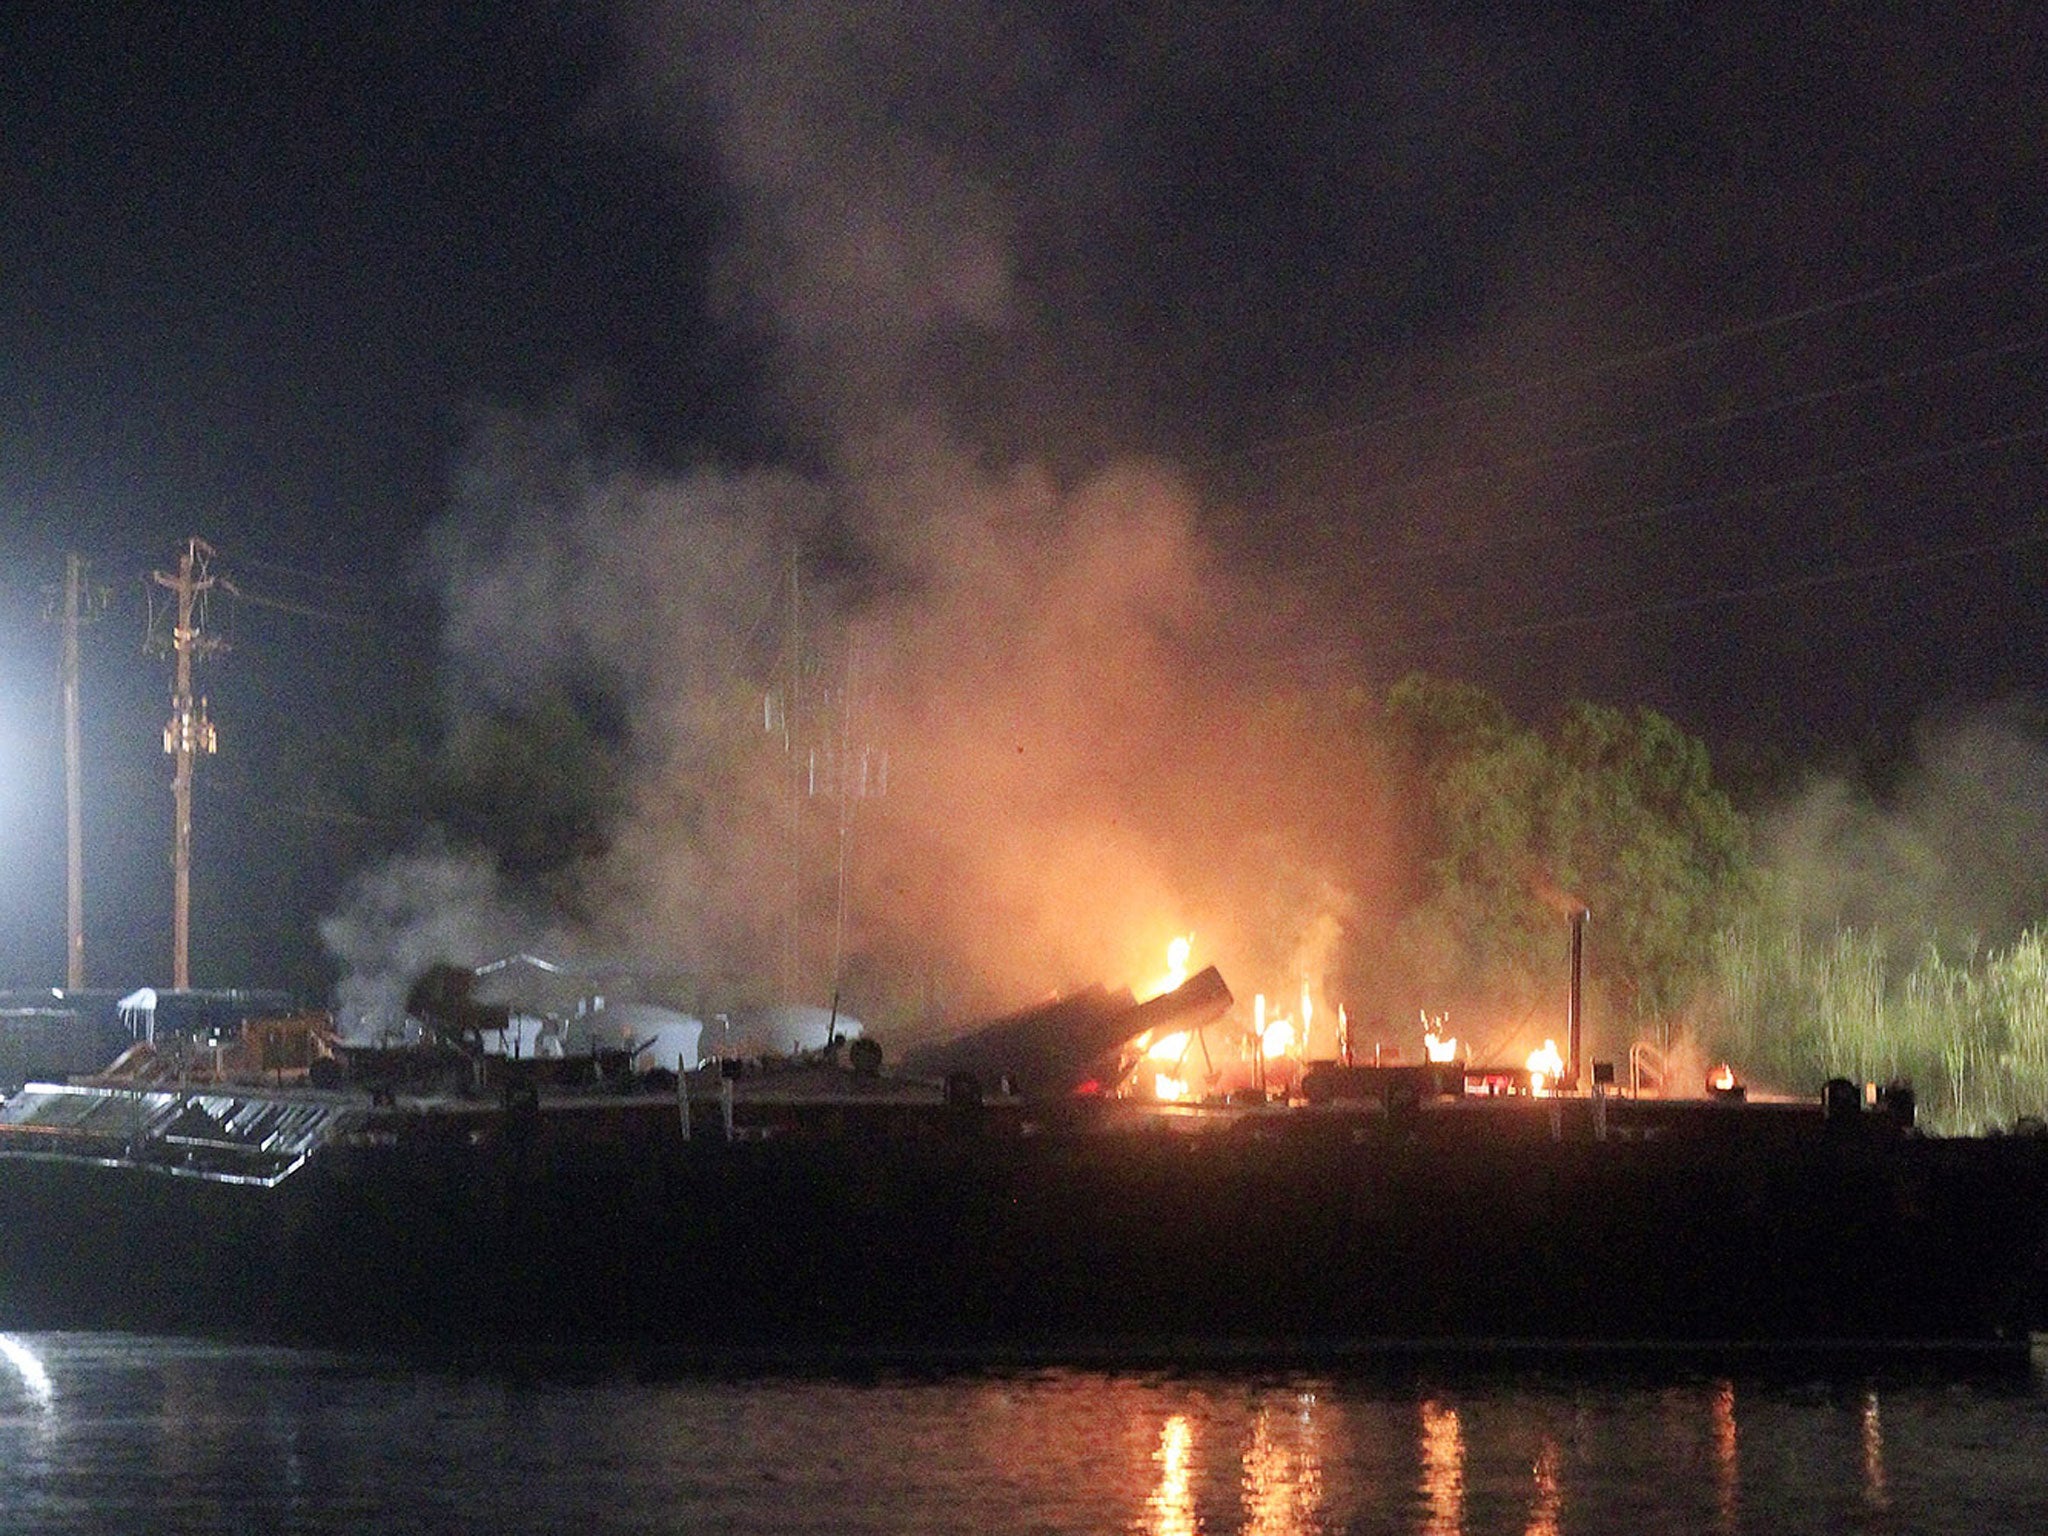 Fire burns aboard a fuel barge near Mobile in Alabama